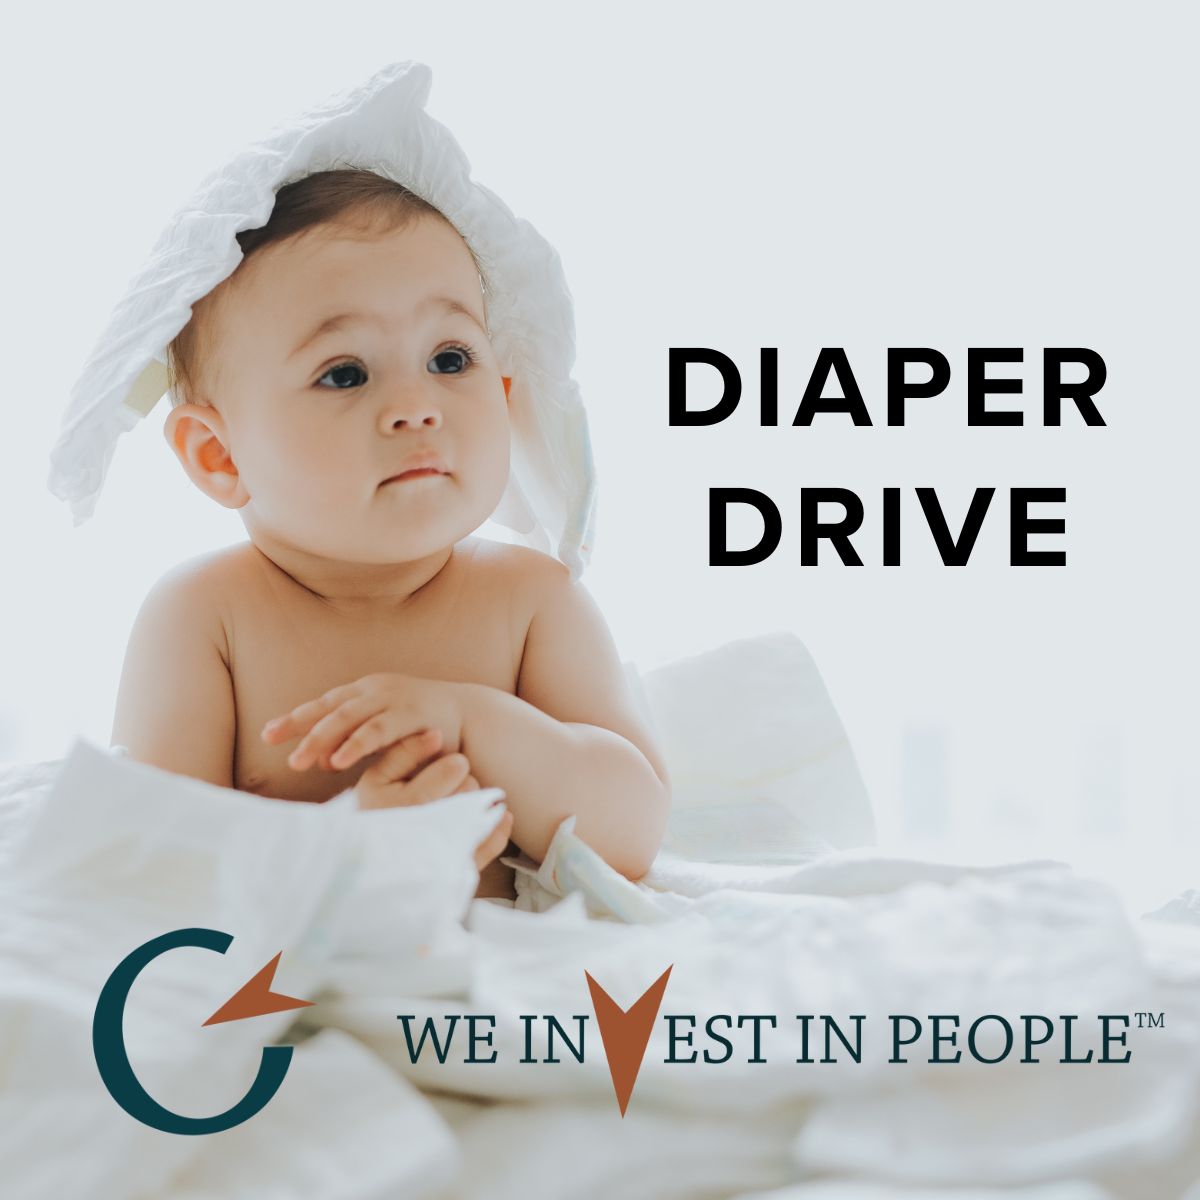 Diaper Drive benefitting The Teddy Bear Den in Sioux Falls and Plus One in Huron